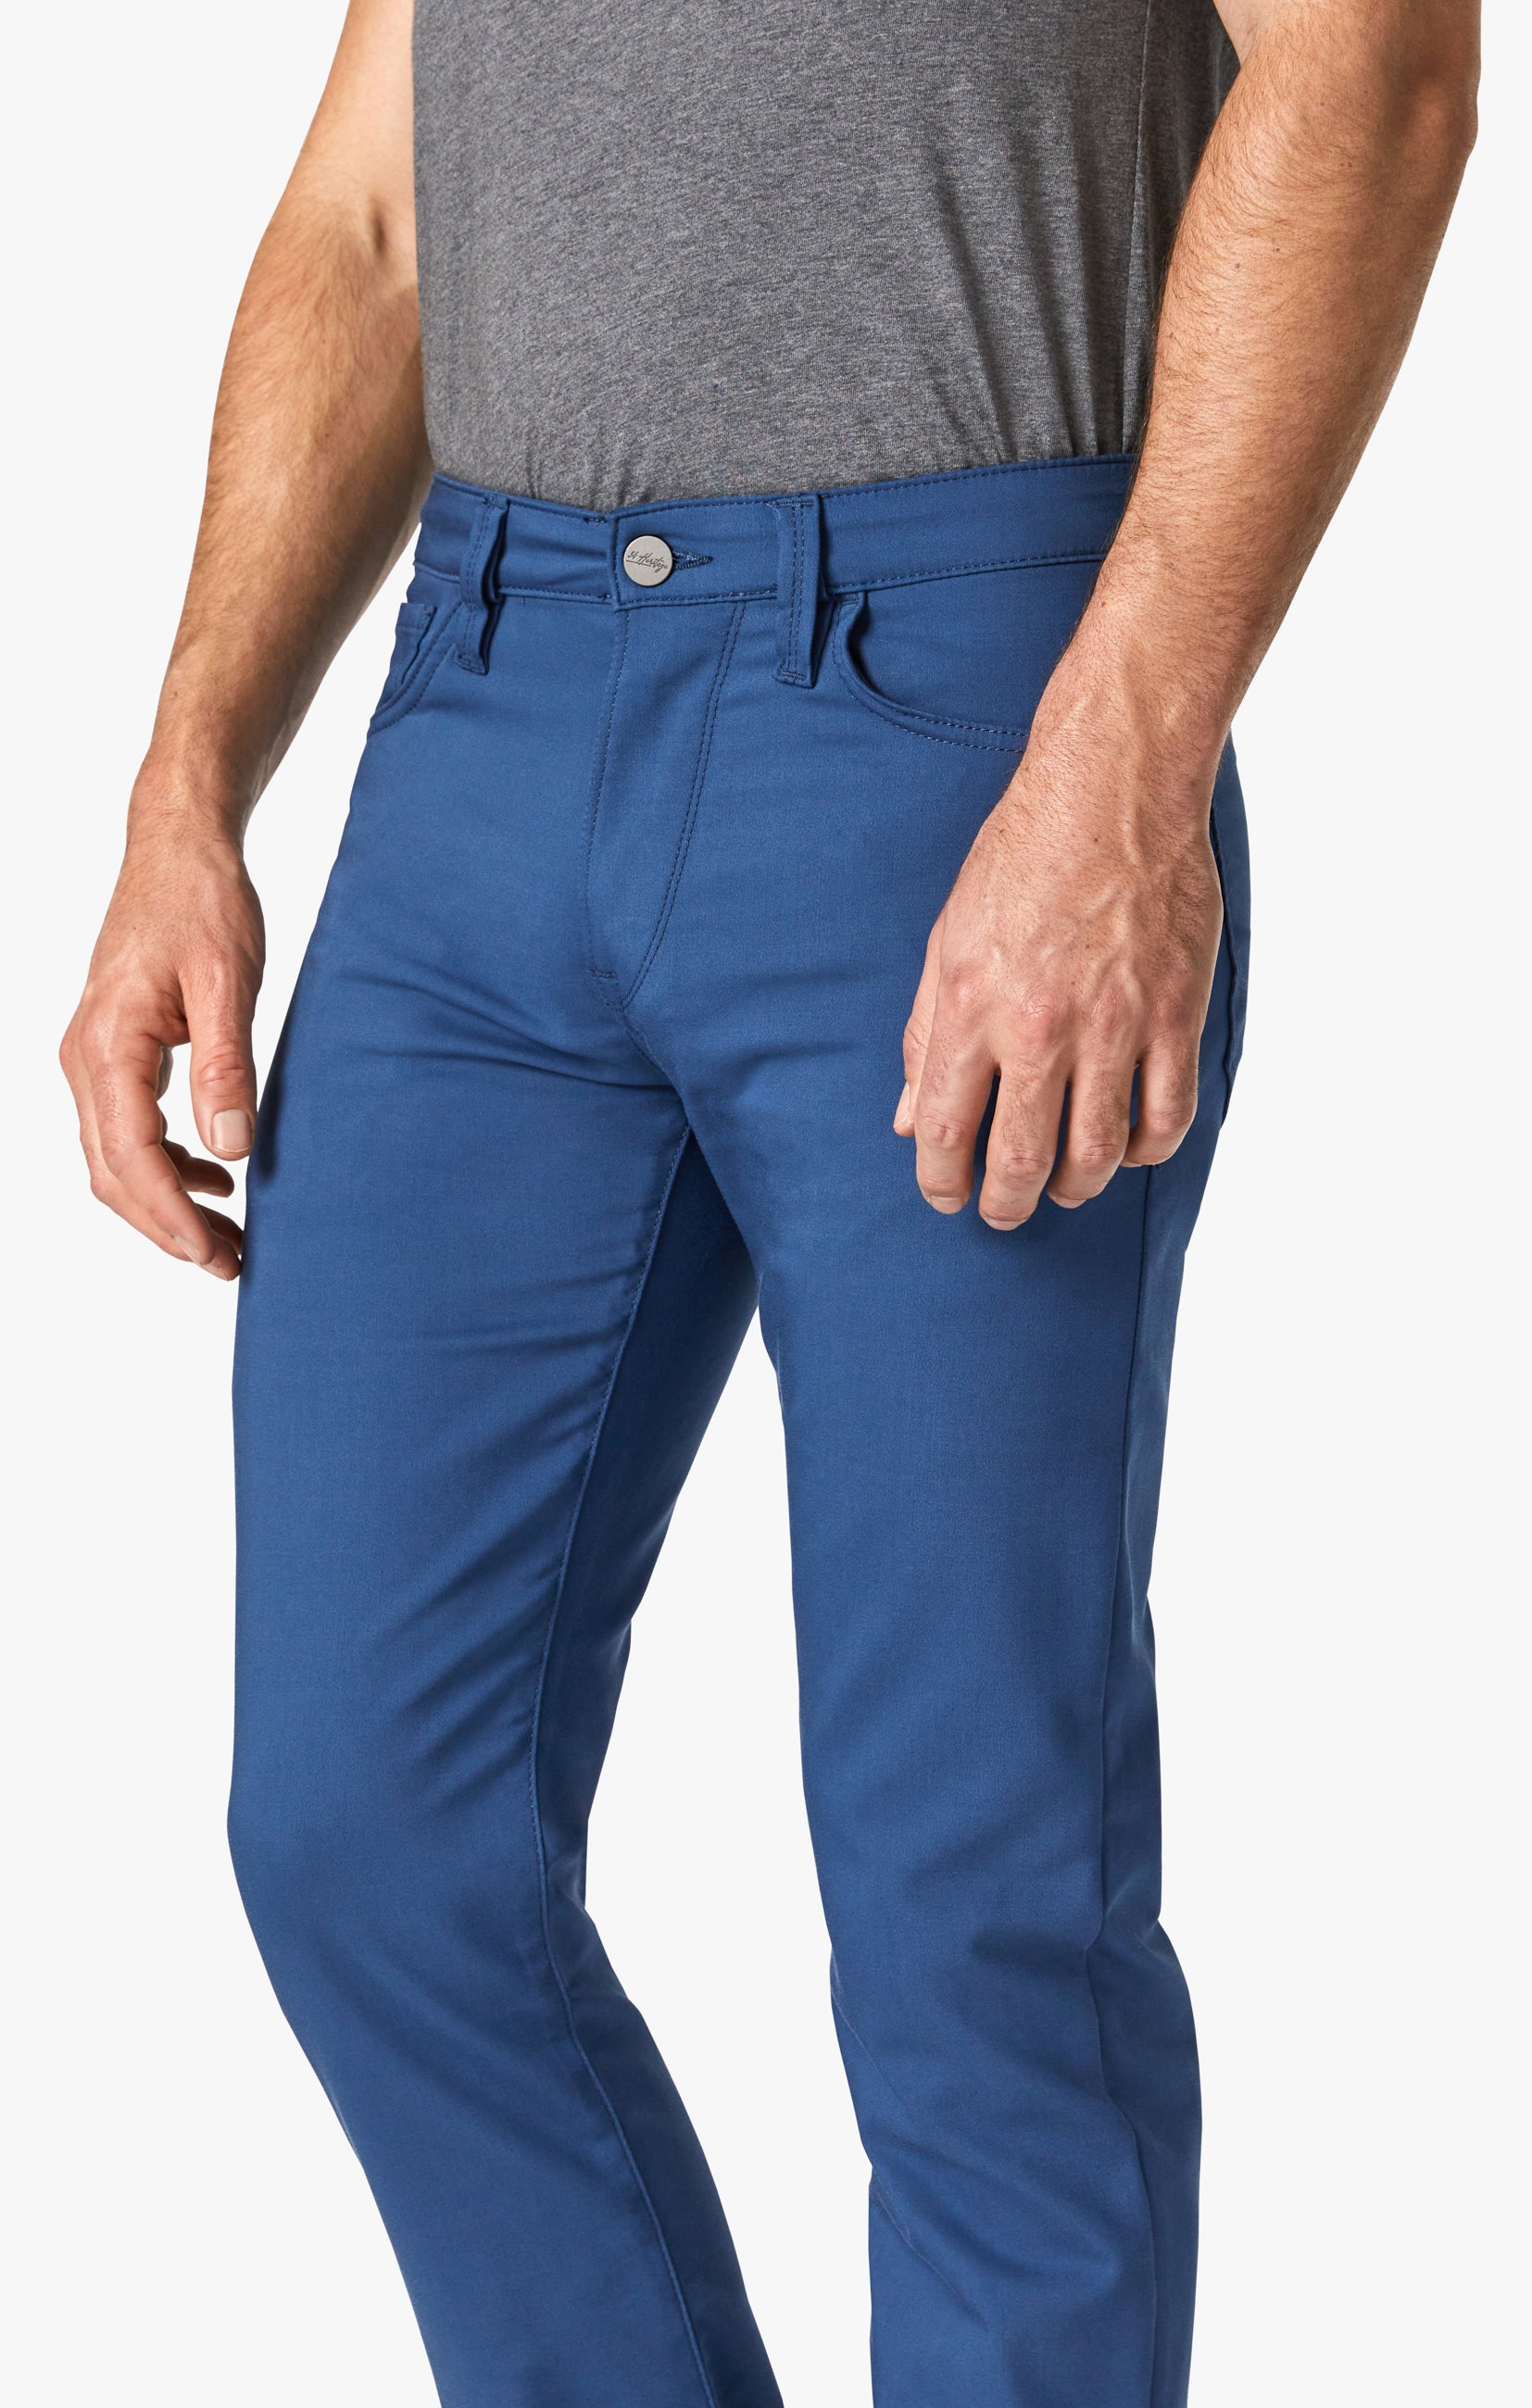 Courage Straight Leg Jeans in Cobalt Commuter Image 6